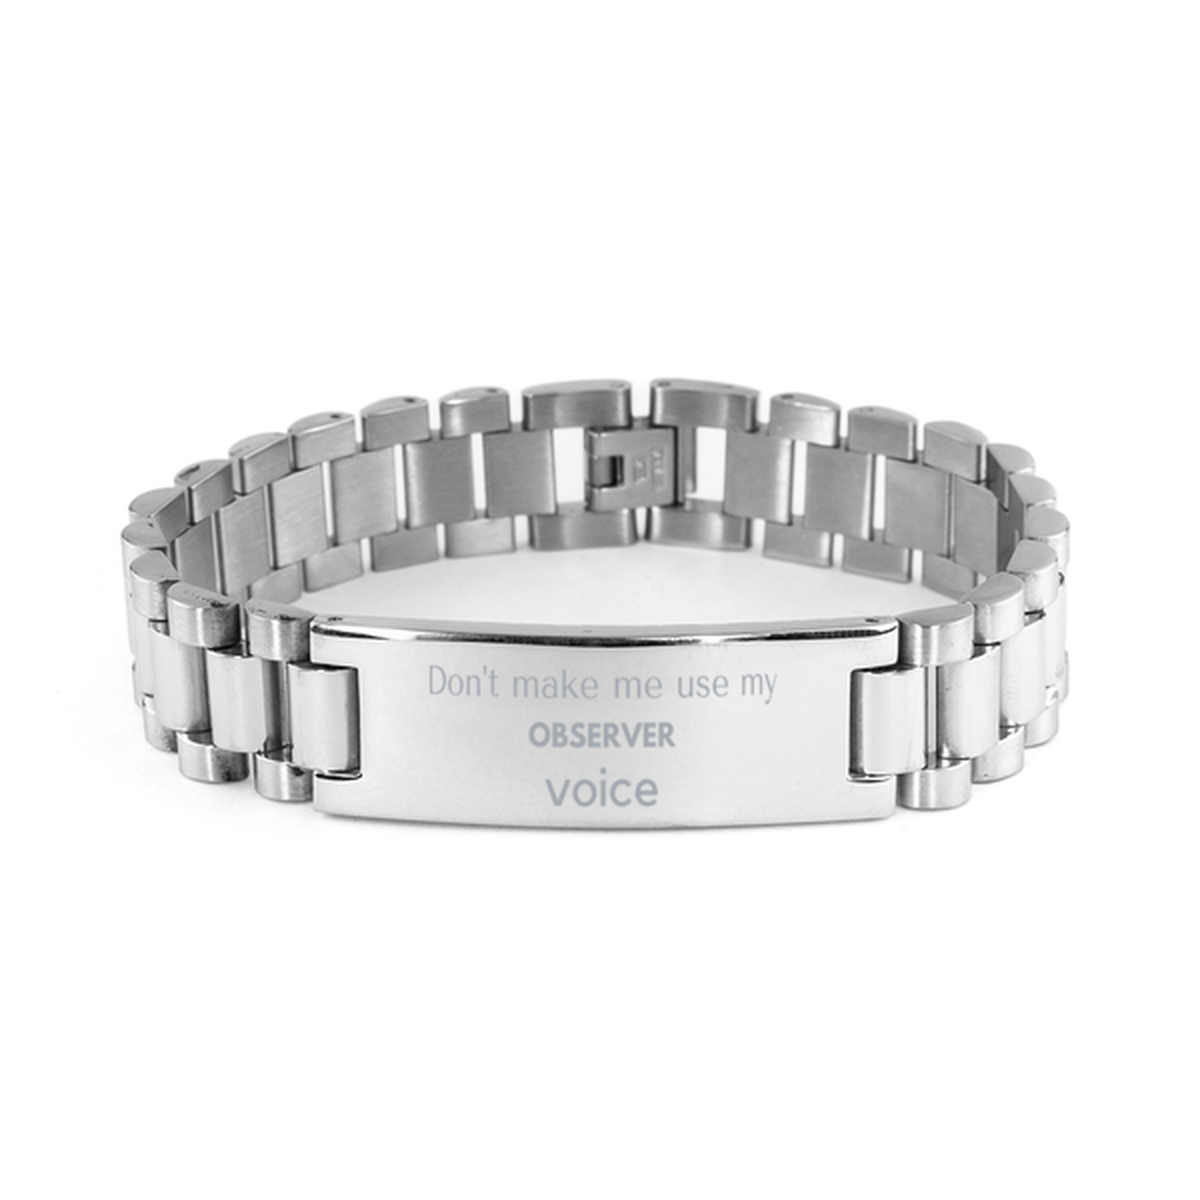 Don't make me use my Observer voice, Sarcasm Observer Gifts, Christmas Observer Ladder Stainless Steel Bracelet Birthday Unique Gifts For Observer Coworkers, Men, Women, Colleague, Friends